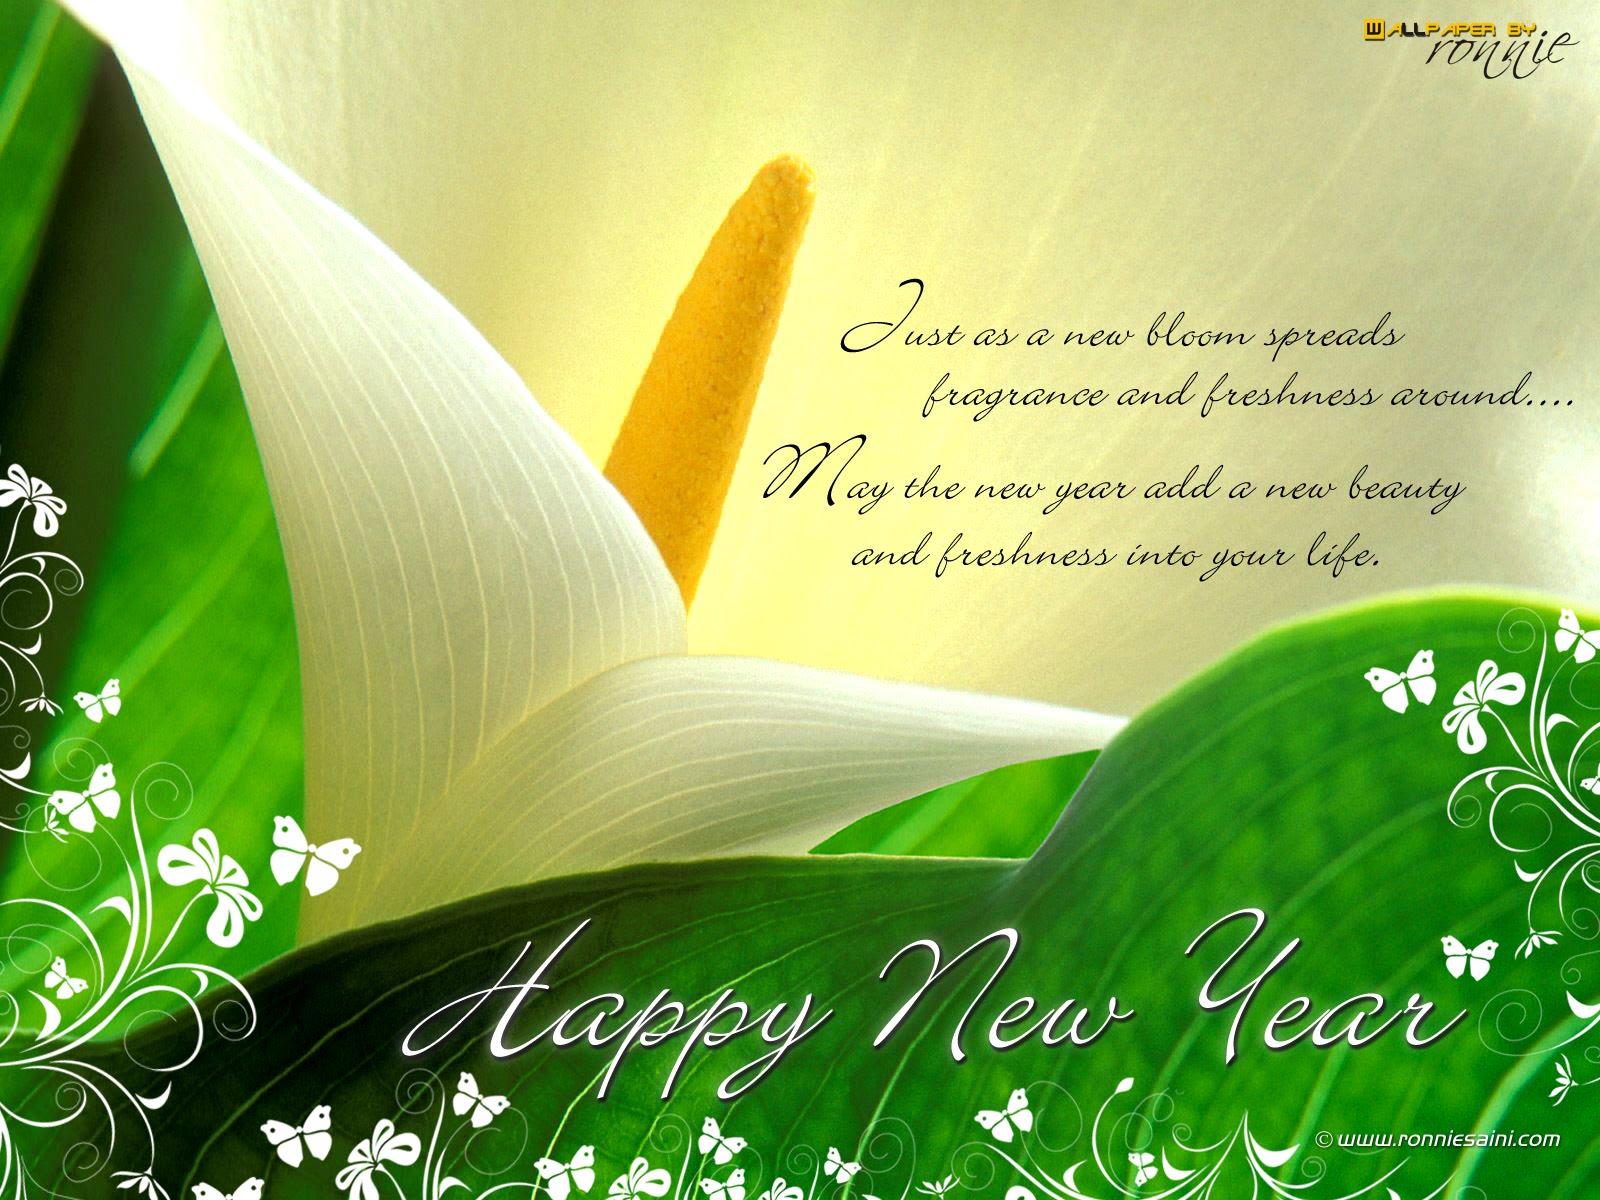 Happy New Year Wishes And Greetings Christian Wallpaper